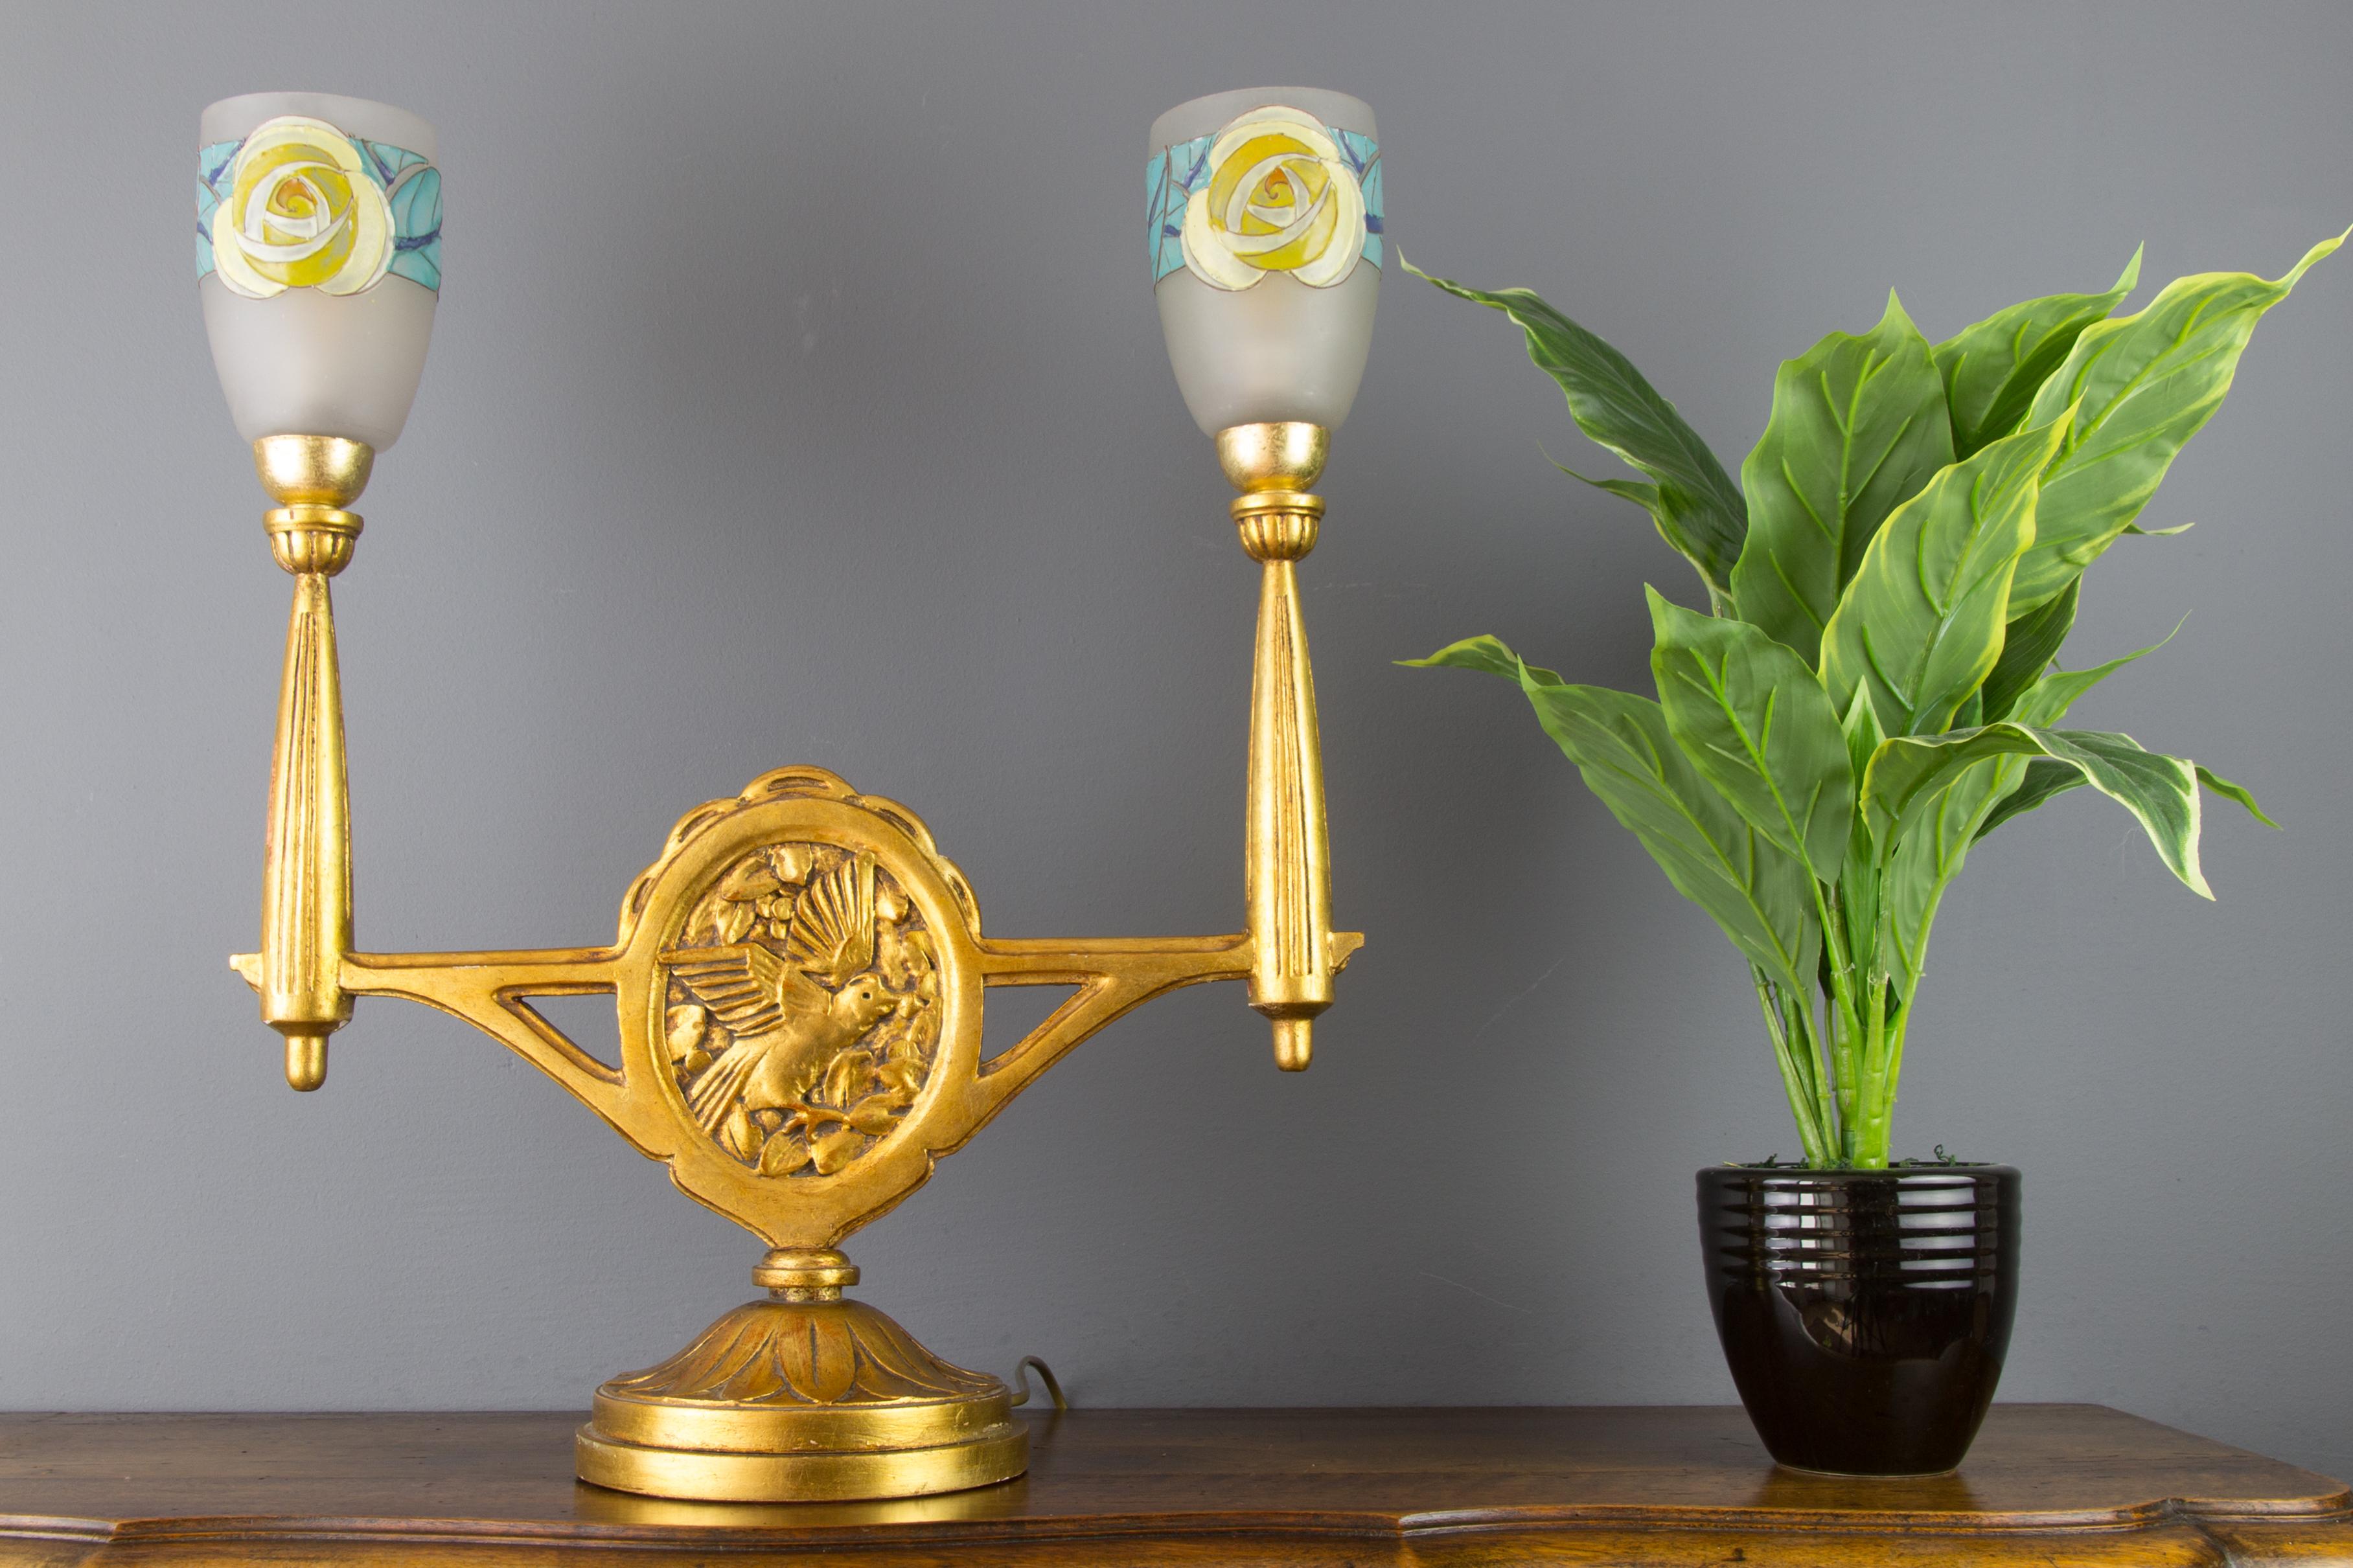 Very unusual and rare Art Deco period table lamp. The base is made of giltwood and has a beautiful carving of birds and leaves. The lamp features two arms, each with an adorable enameled frosted glass shade with floral decors, attributed to Loys